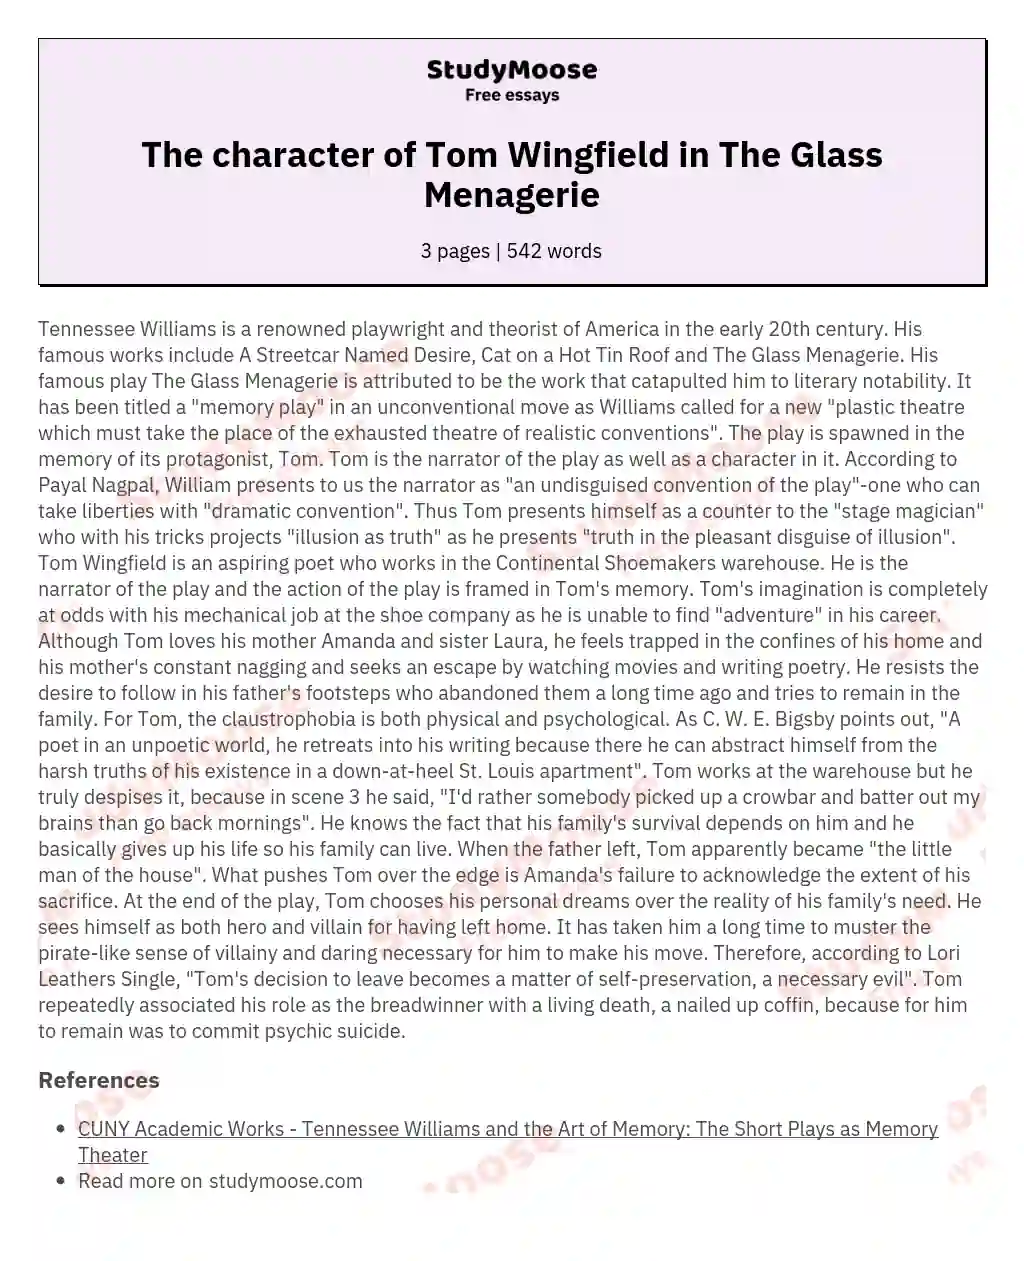 The character of Tom Wingfield in The Glass Menagerie essay